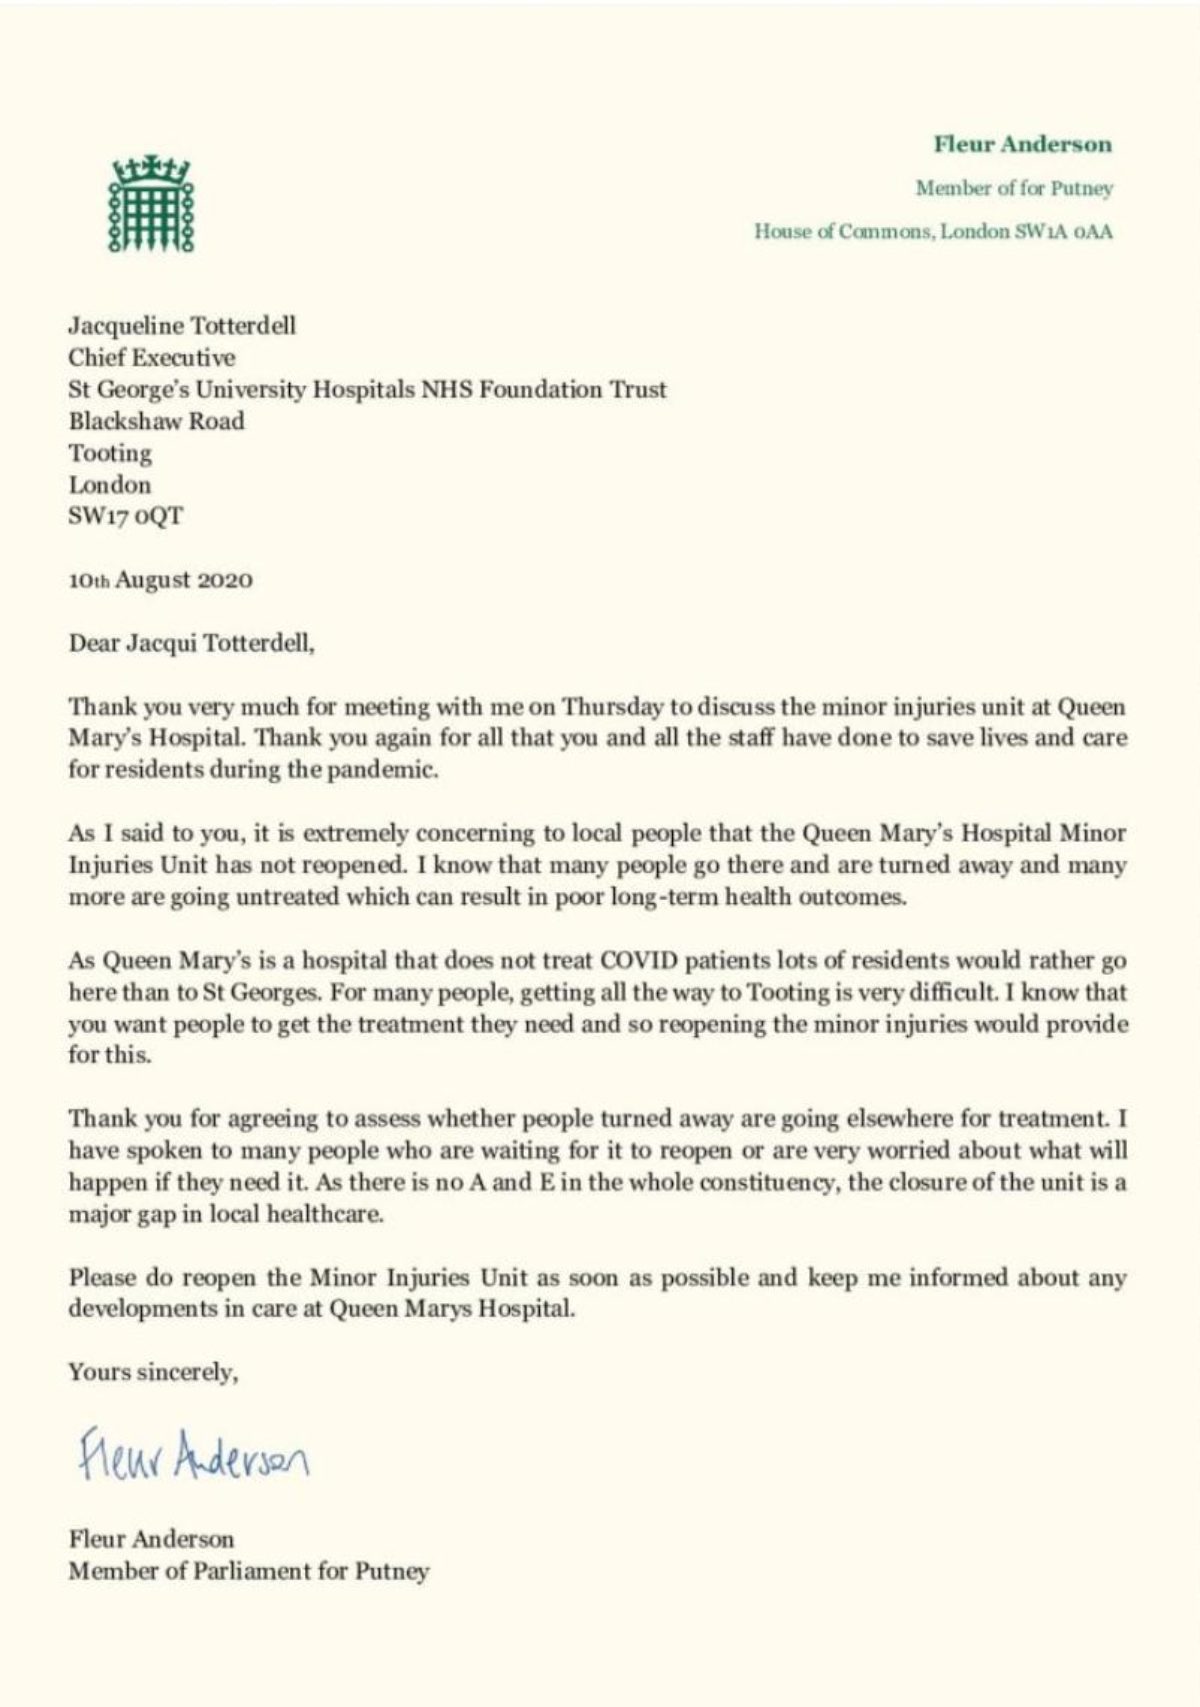 Letter to Jacqueline Totterdell from Fleur Anderson MP asking for minor injuries unit to reopen.